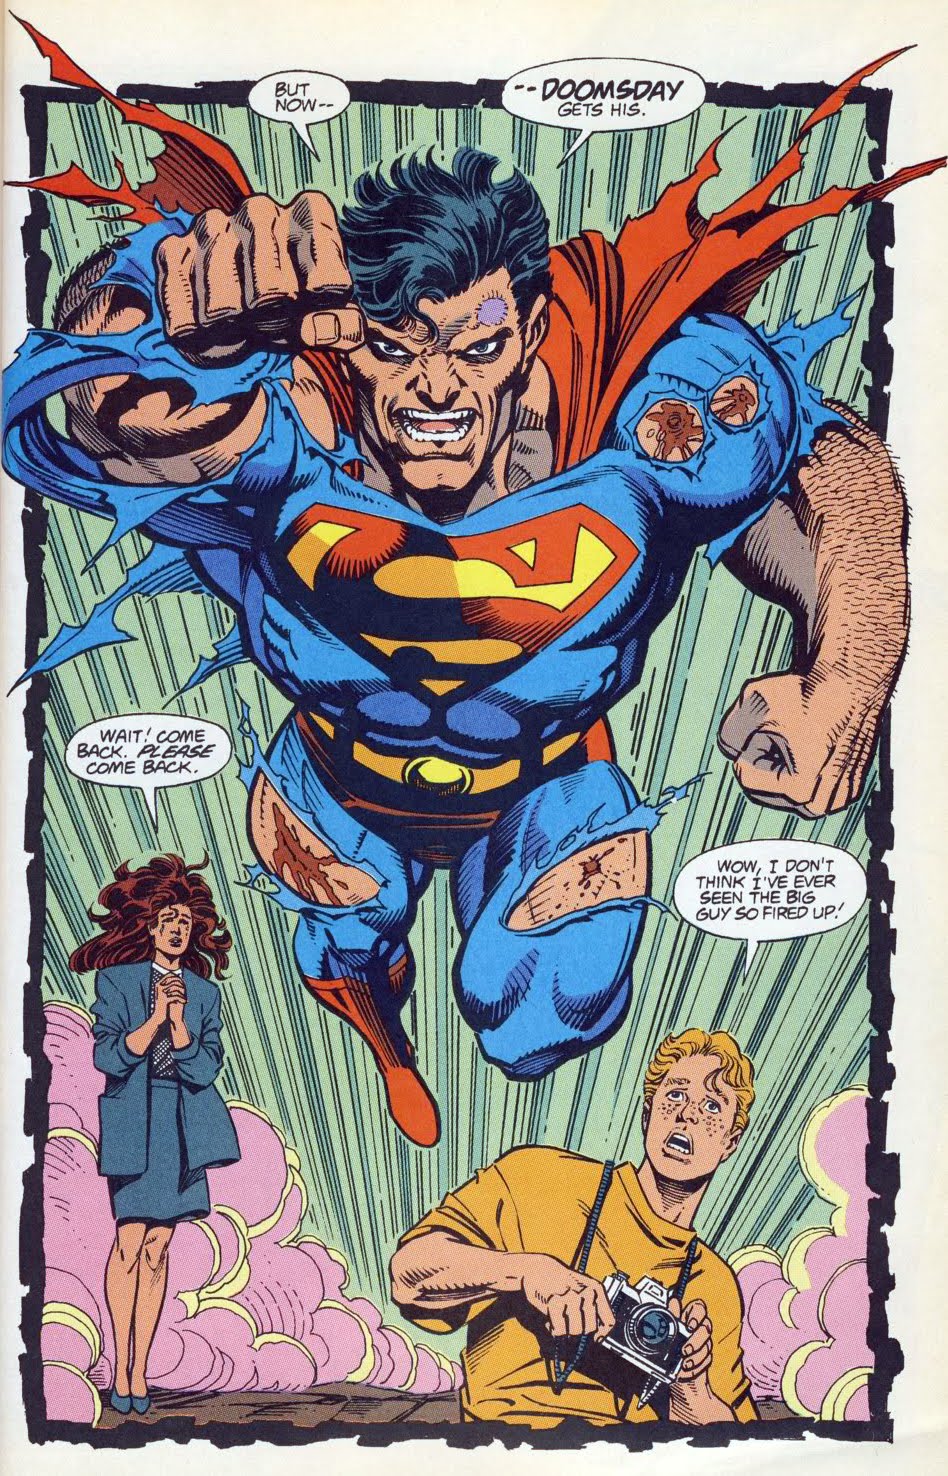 The Death Of Superman